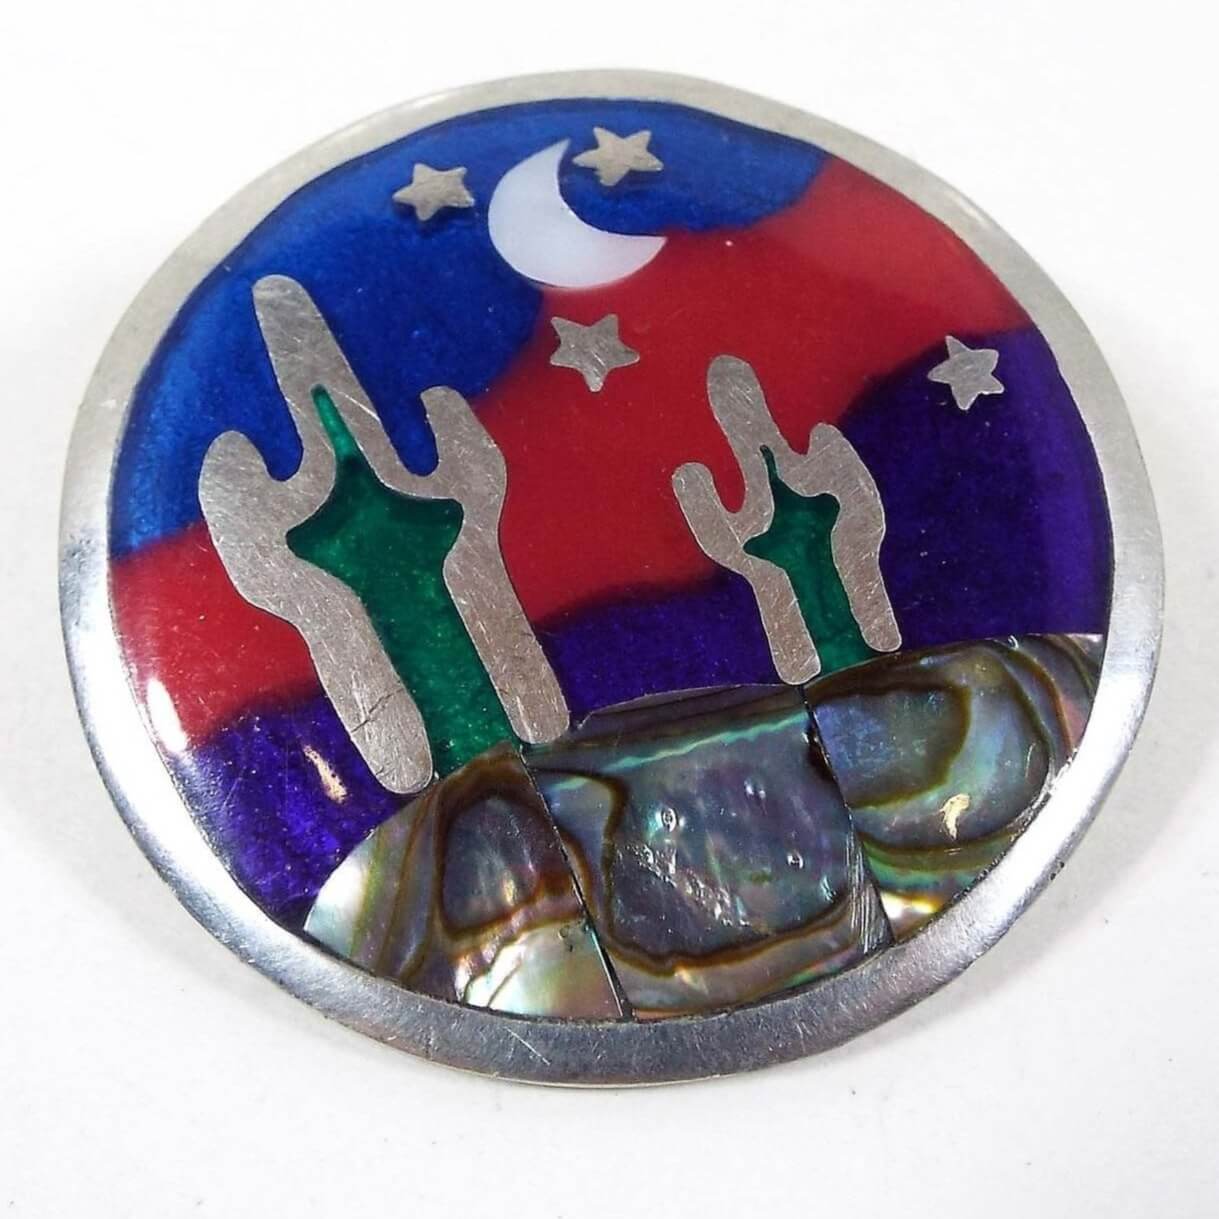 Front view of the retro vintage Southwestern style desert brooch pendant. The metal is silver tone in color. The brooch is round with a night time desert scene on the front. The top has tiny metal stars and an inlaid mother of pearl shell cab in the shape of a half moon. The bottom part of the brooch has pearly multi color inlaid abalone shell. There are two cactus with green enamel and the background has blue enamel with a wavy red enamel stripe through it.